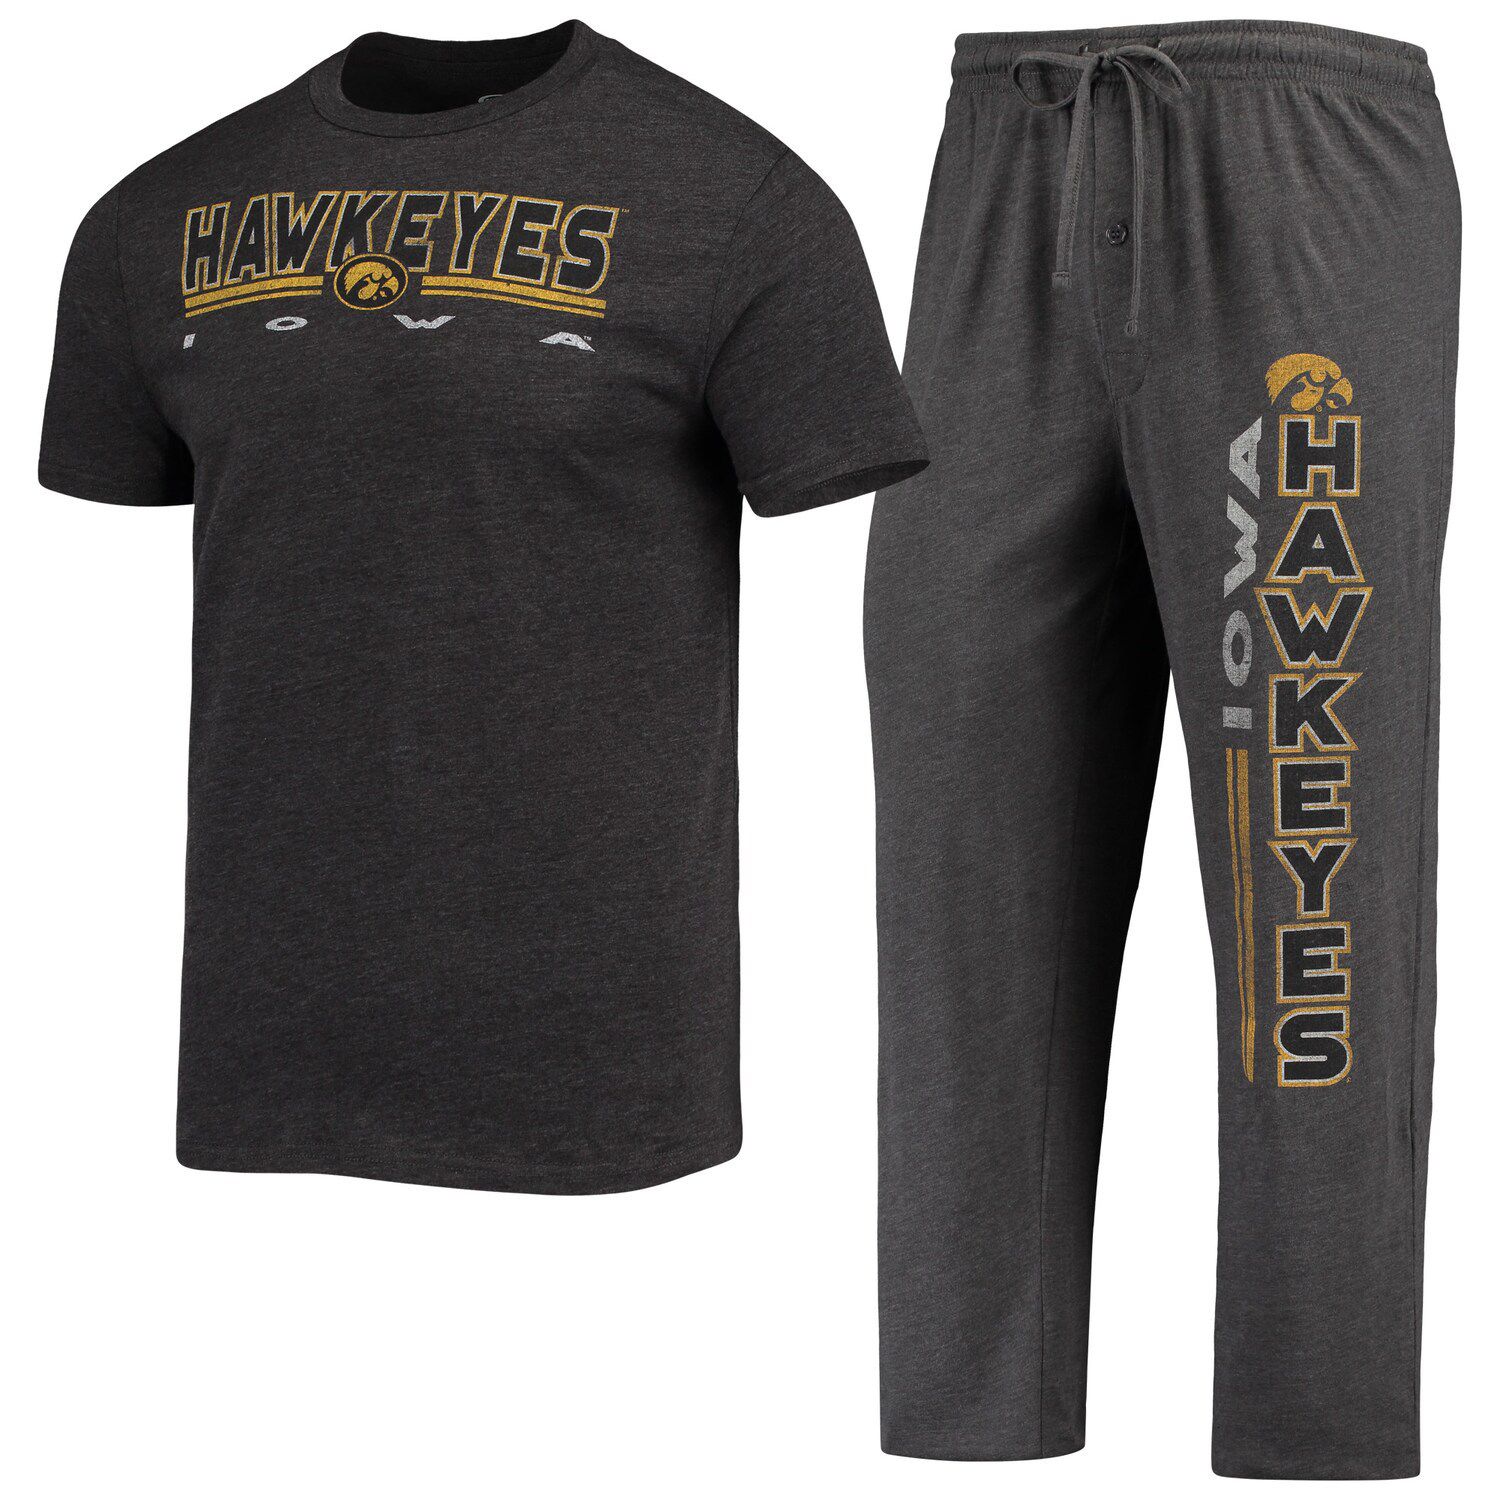 Image for Unbranded Men's Concepts Sport Heathered Charcoal/Black Iowa Hawkeyes Meter T-Shirt & Pants Sleep Set at Kohl's.